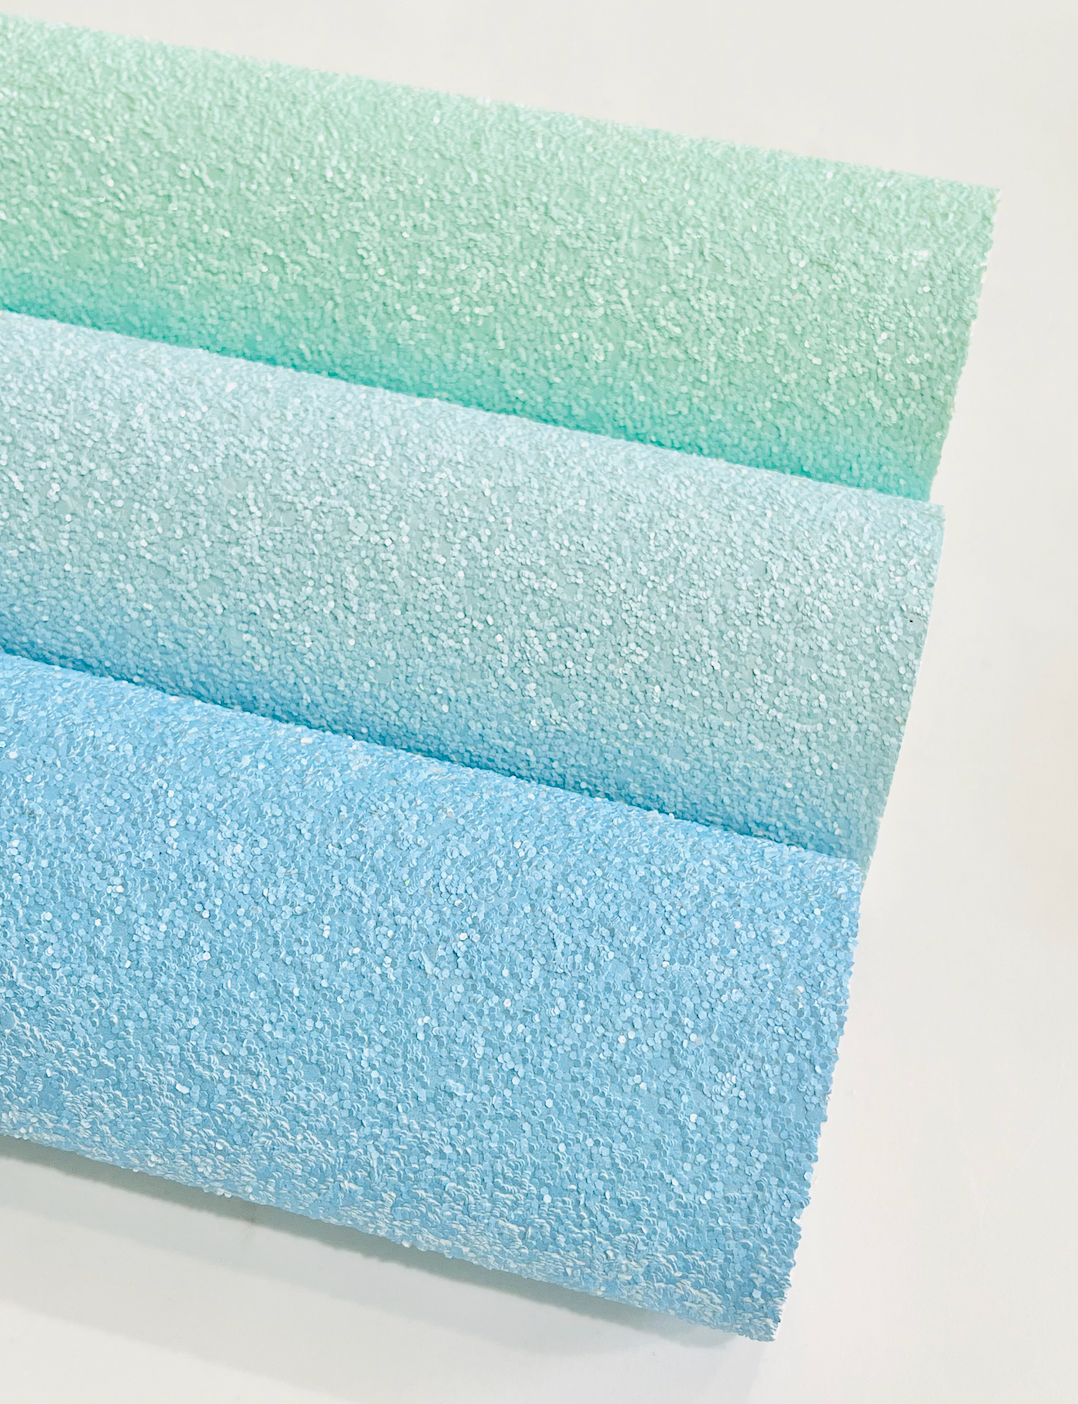 Baby Blue Chunky Glitter Fabric Sheets